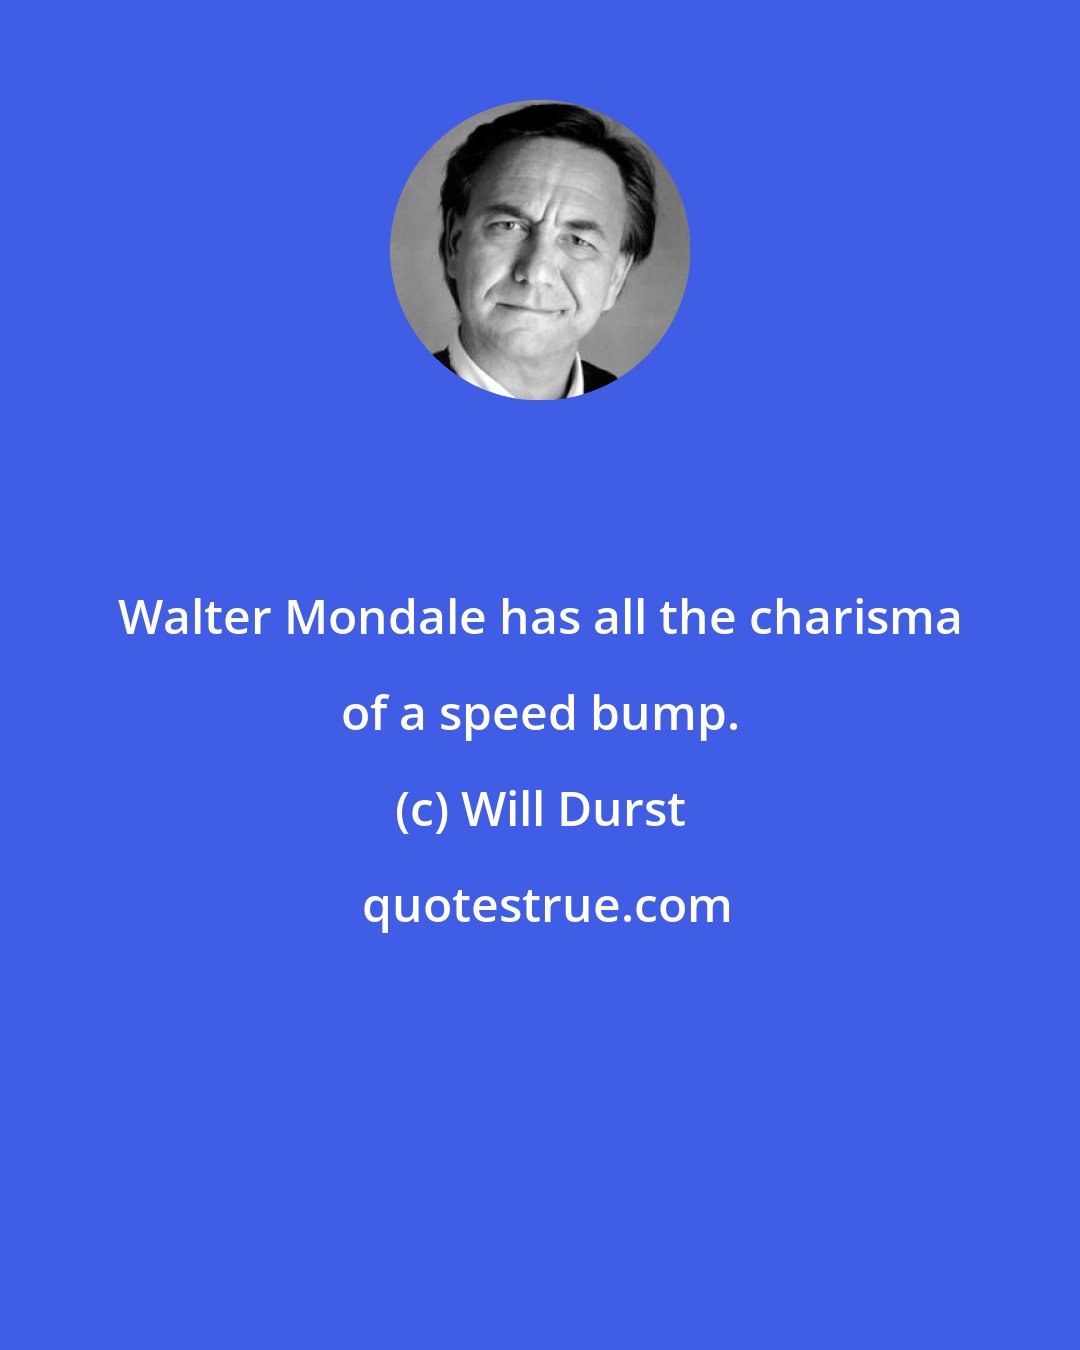 Will Durst: Walter Mondale has all the charisma of a speed bump.